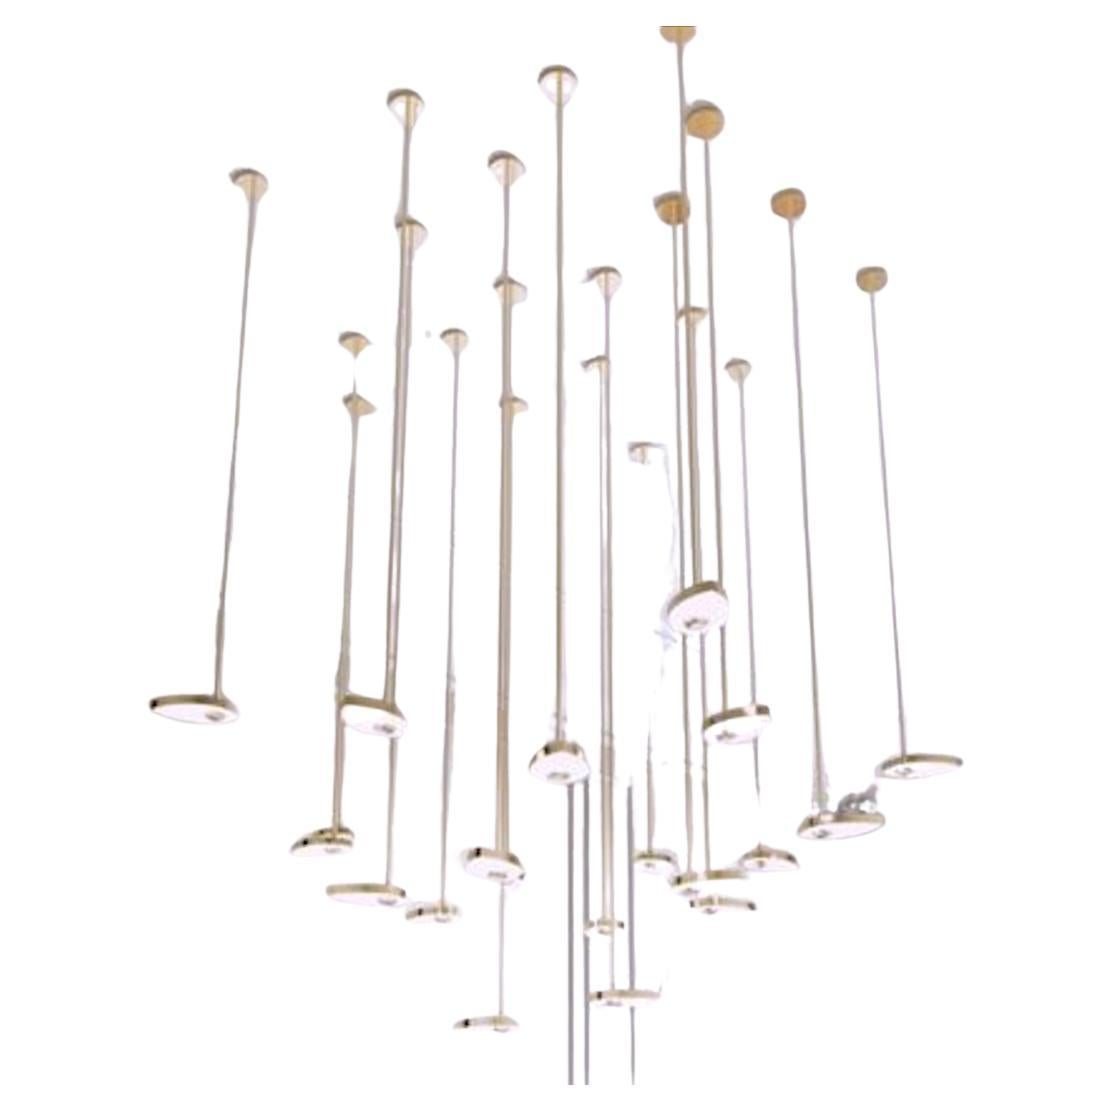 Lilly Contemporary Sculptural LED Chandelier, Solid Brass and crystal. Large